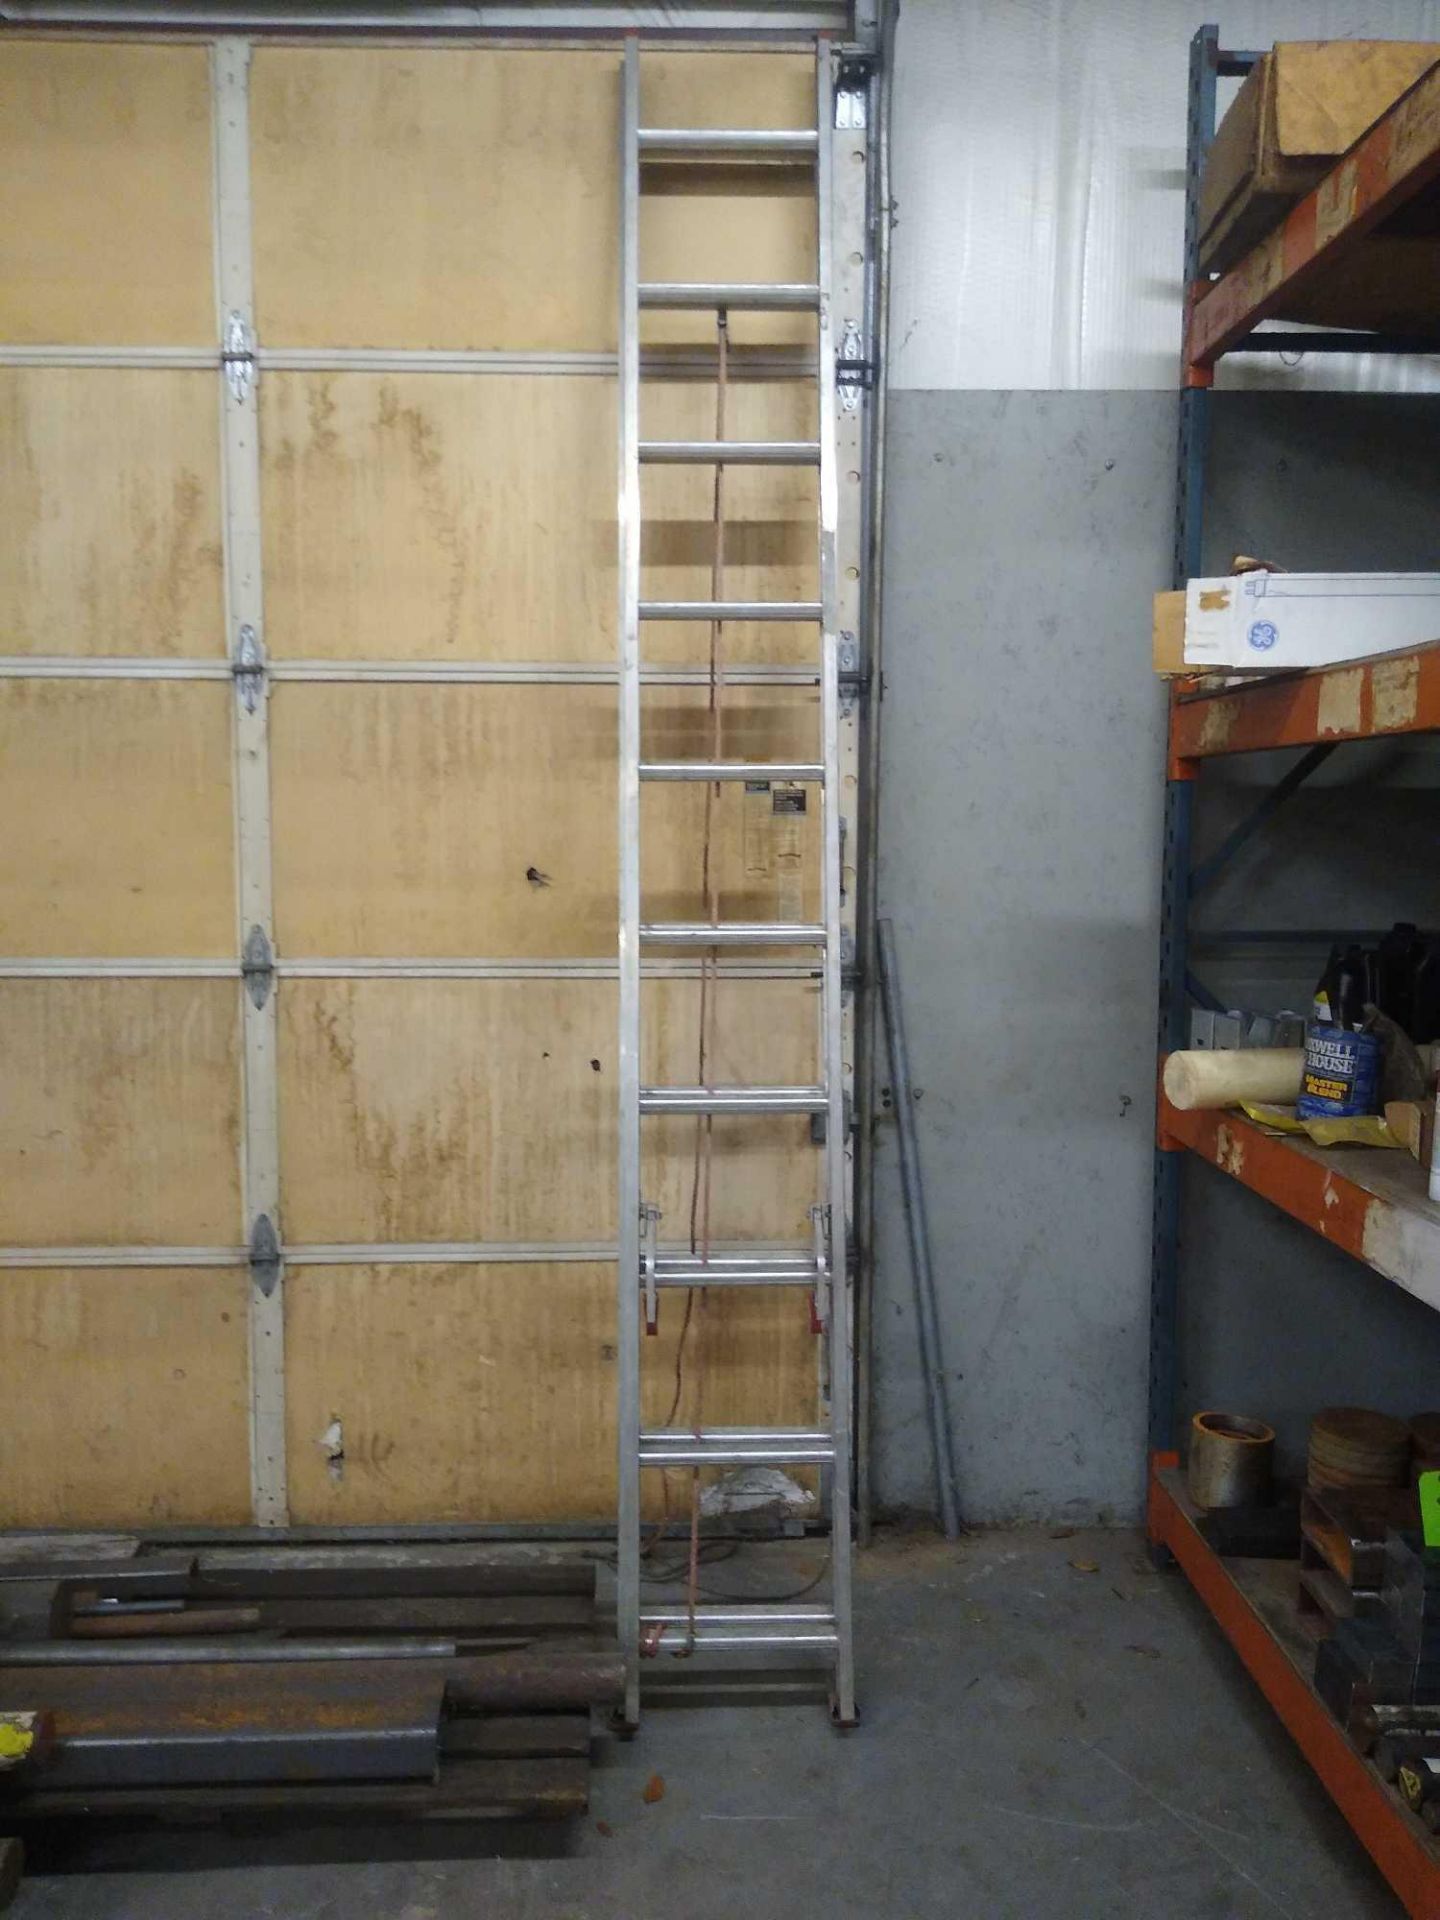 All American Ladder Model A3020-2 20' Extension Ladder Manufacturer: All American Ladder Model: A302